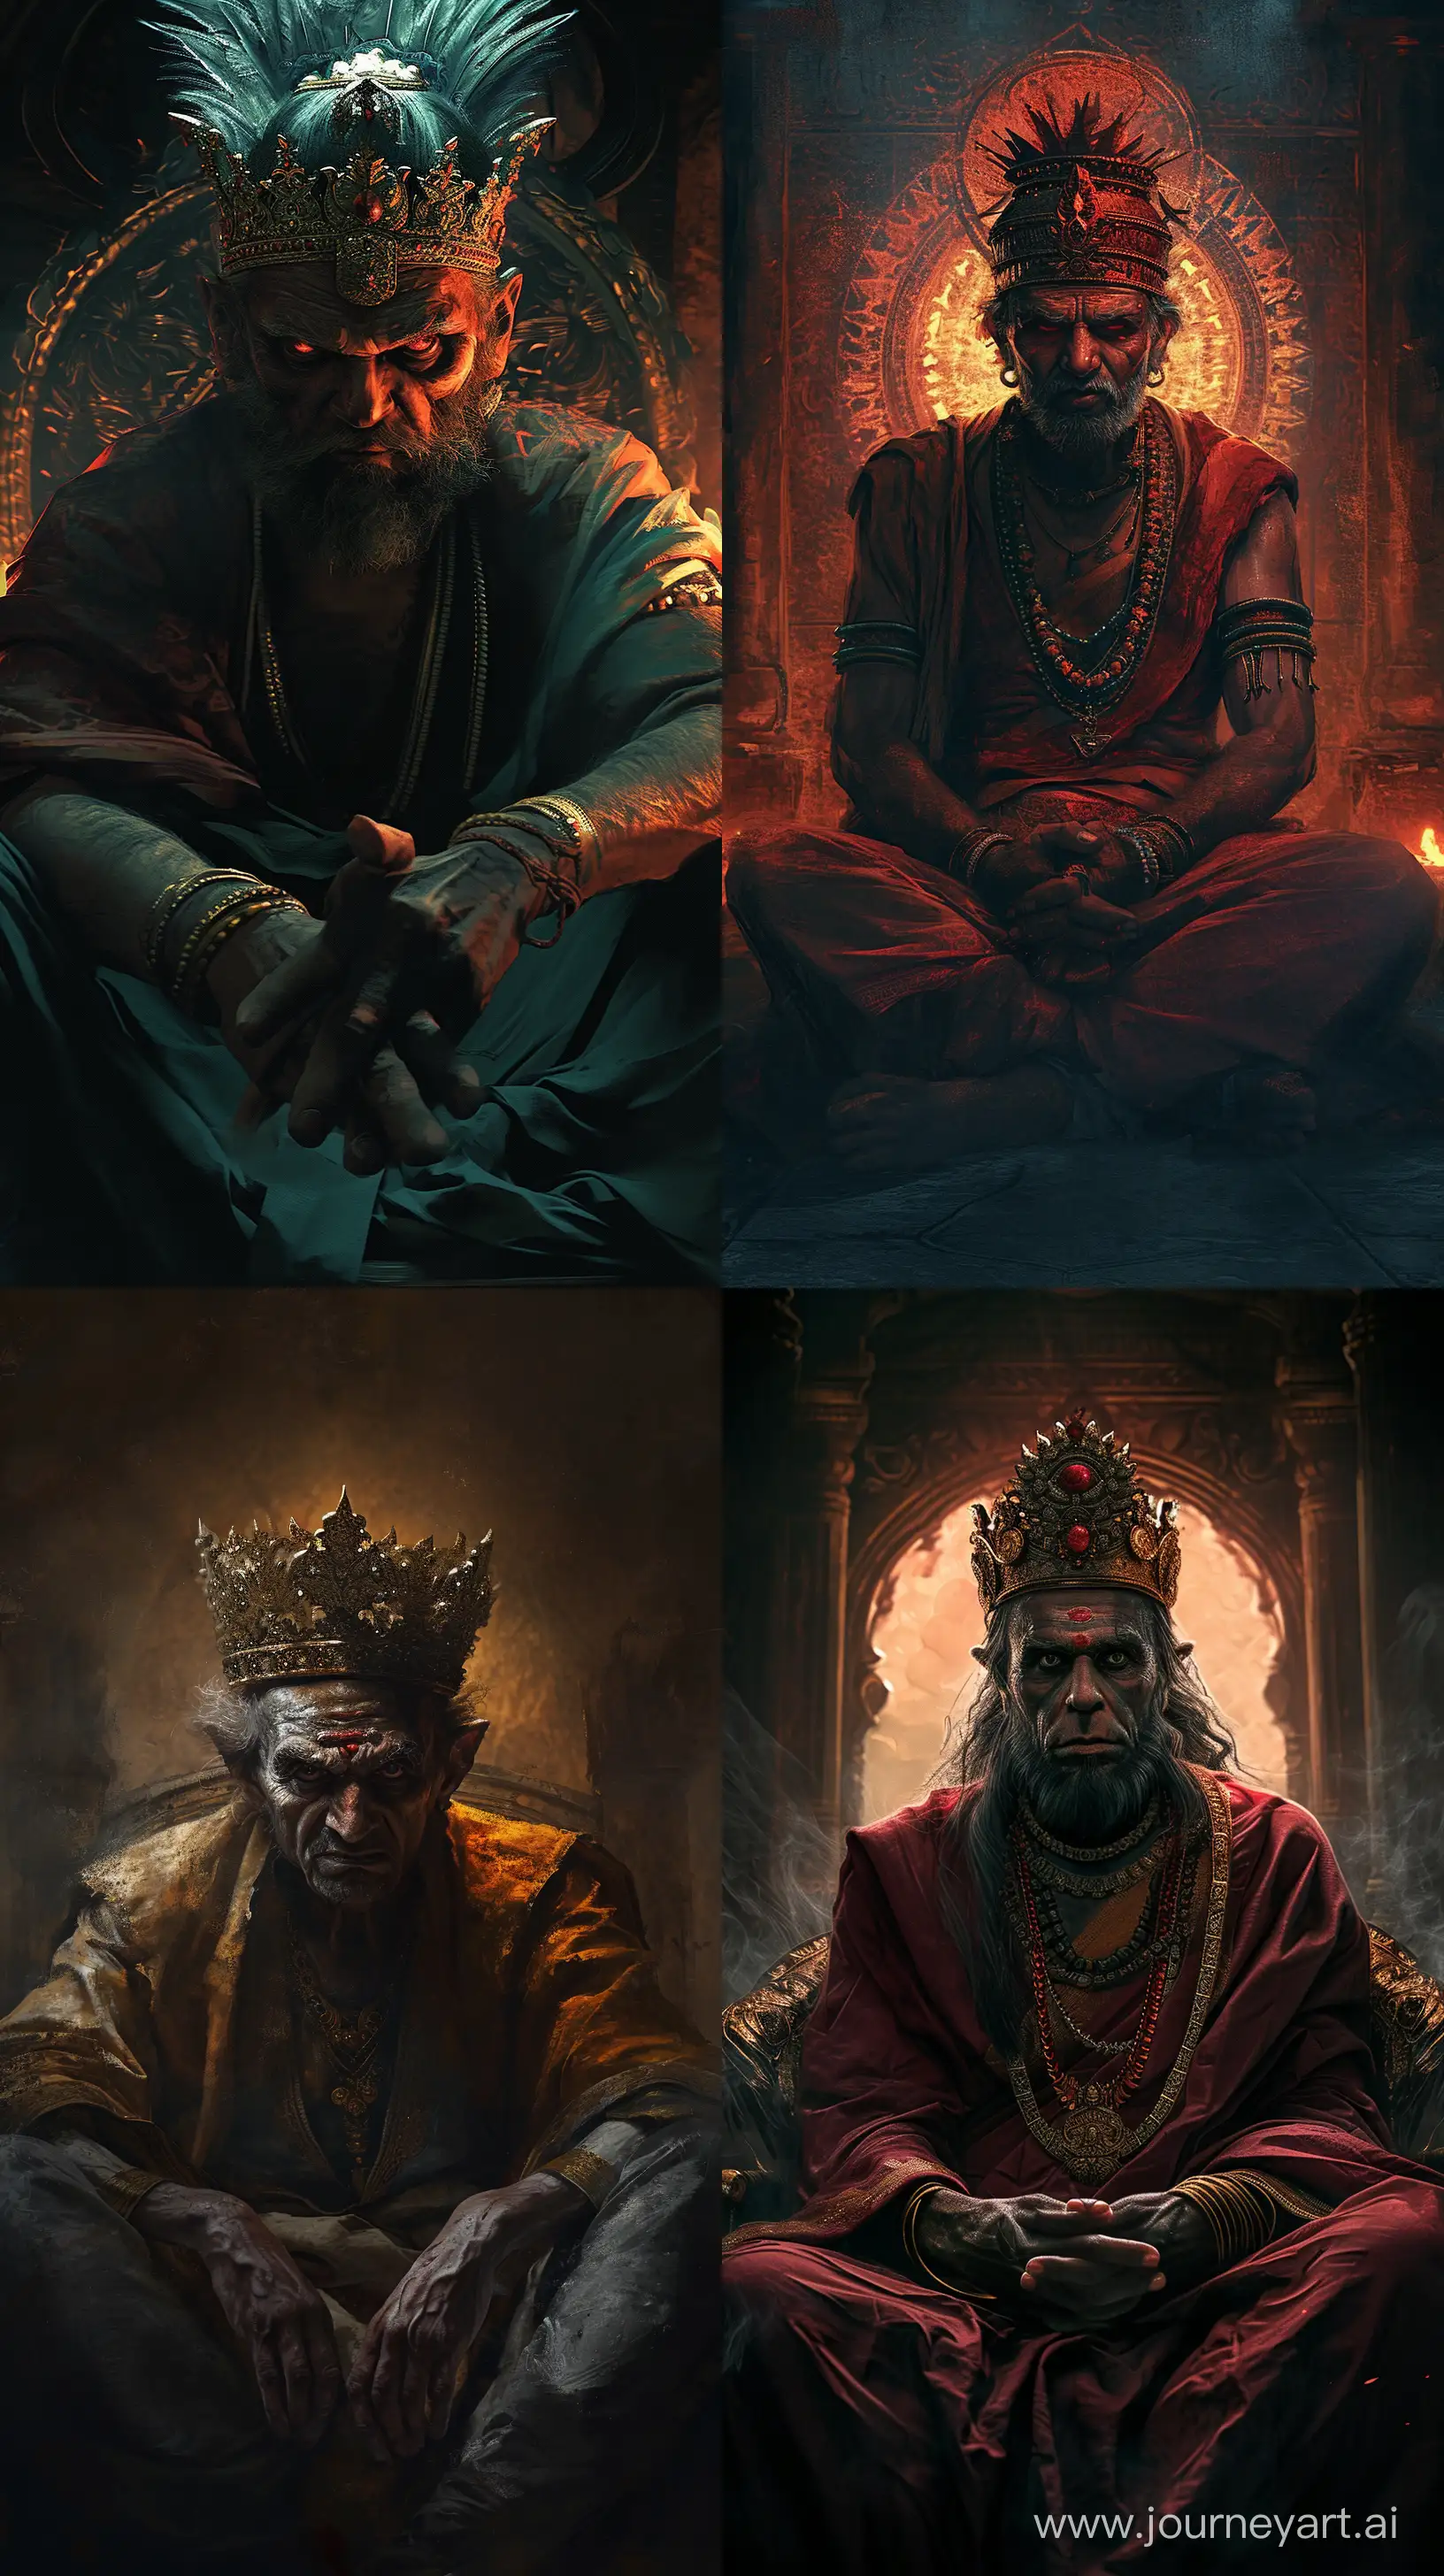 digital painting like images of a man that looks like an Indian king from ancient times, evil look on his face, seated in a crown, dim lighting around him, ultra detailed, high resolution 8k quality images, --ar 9:16